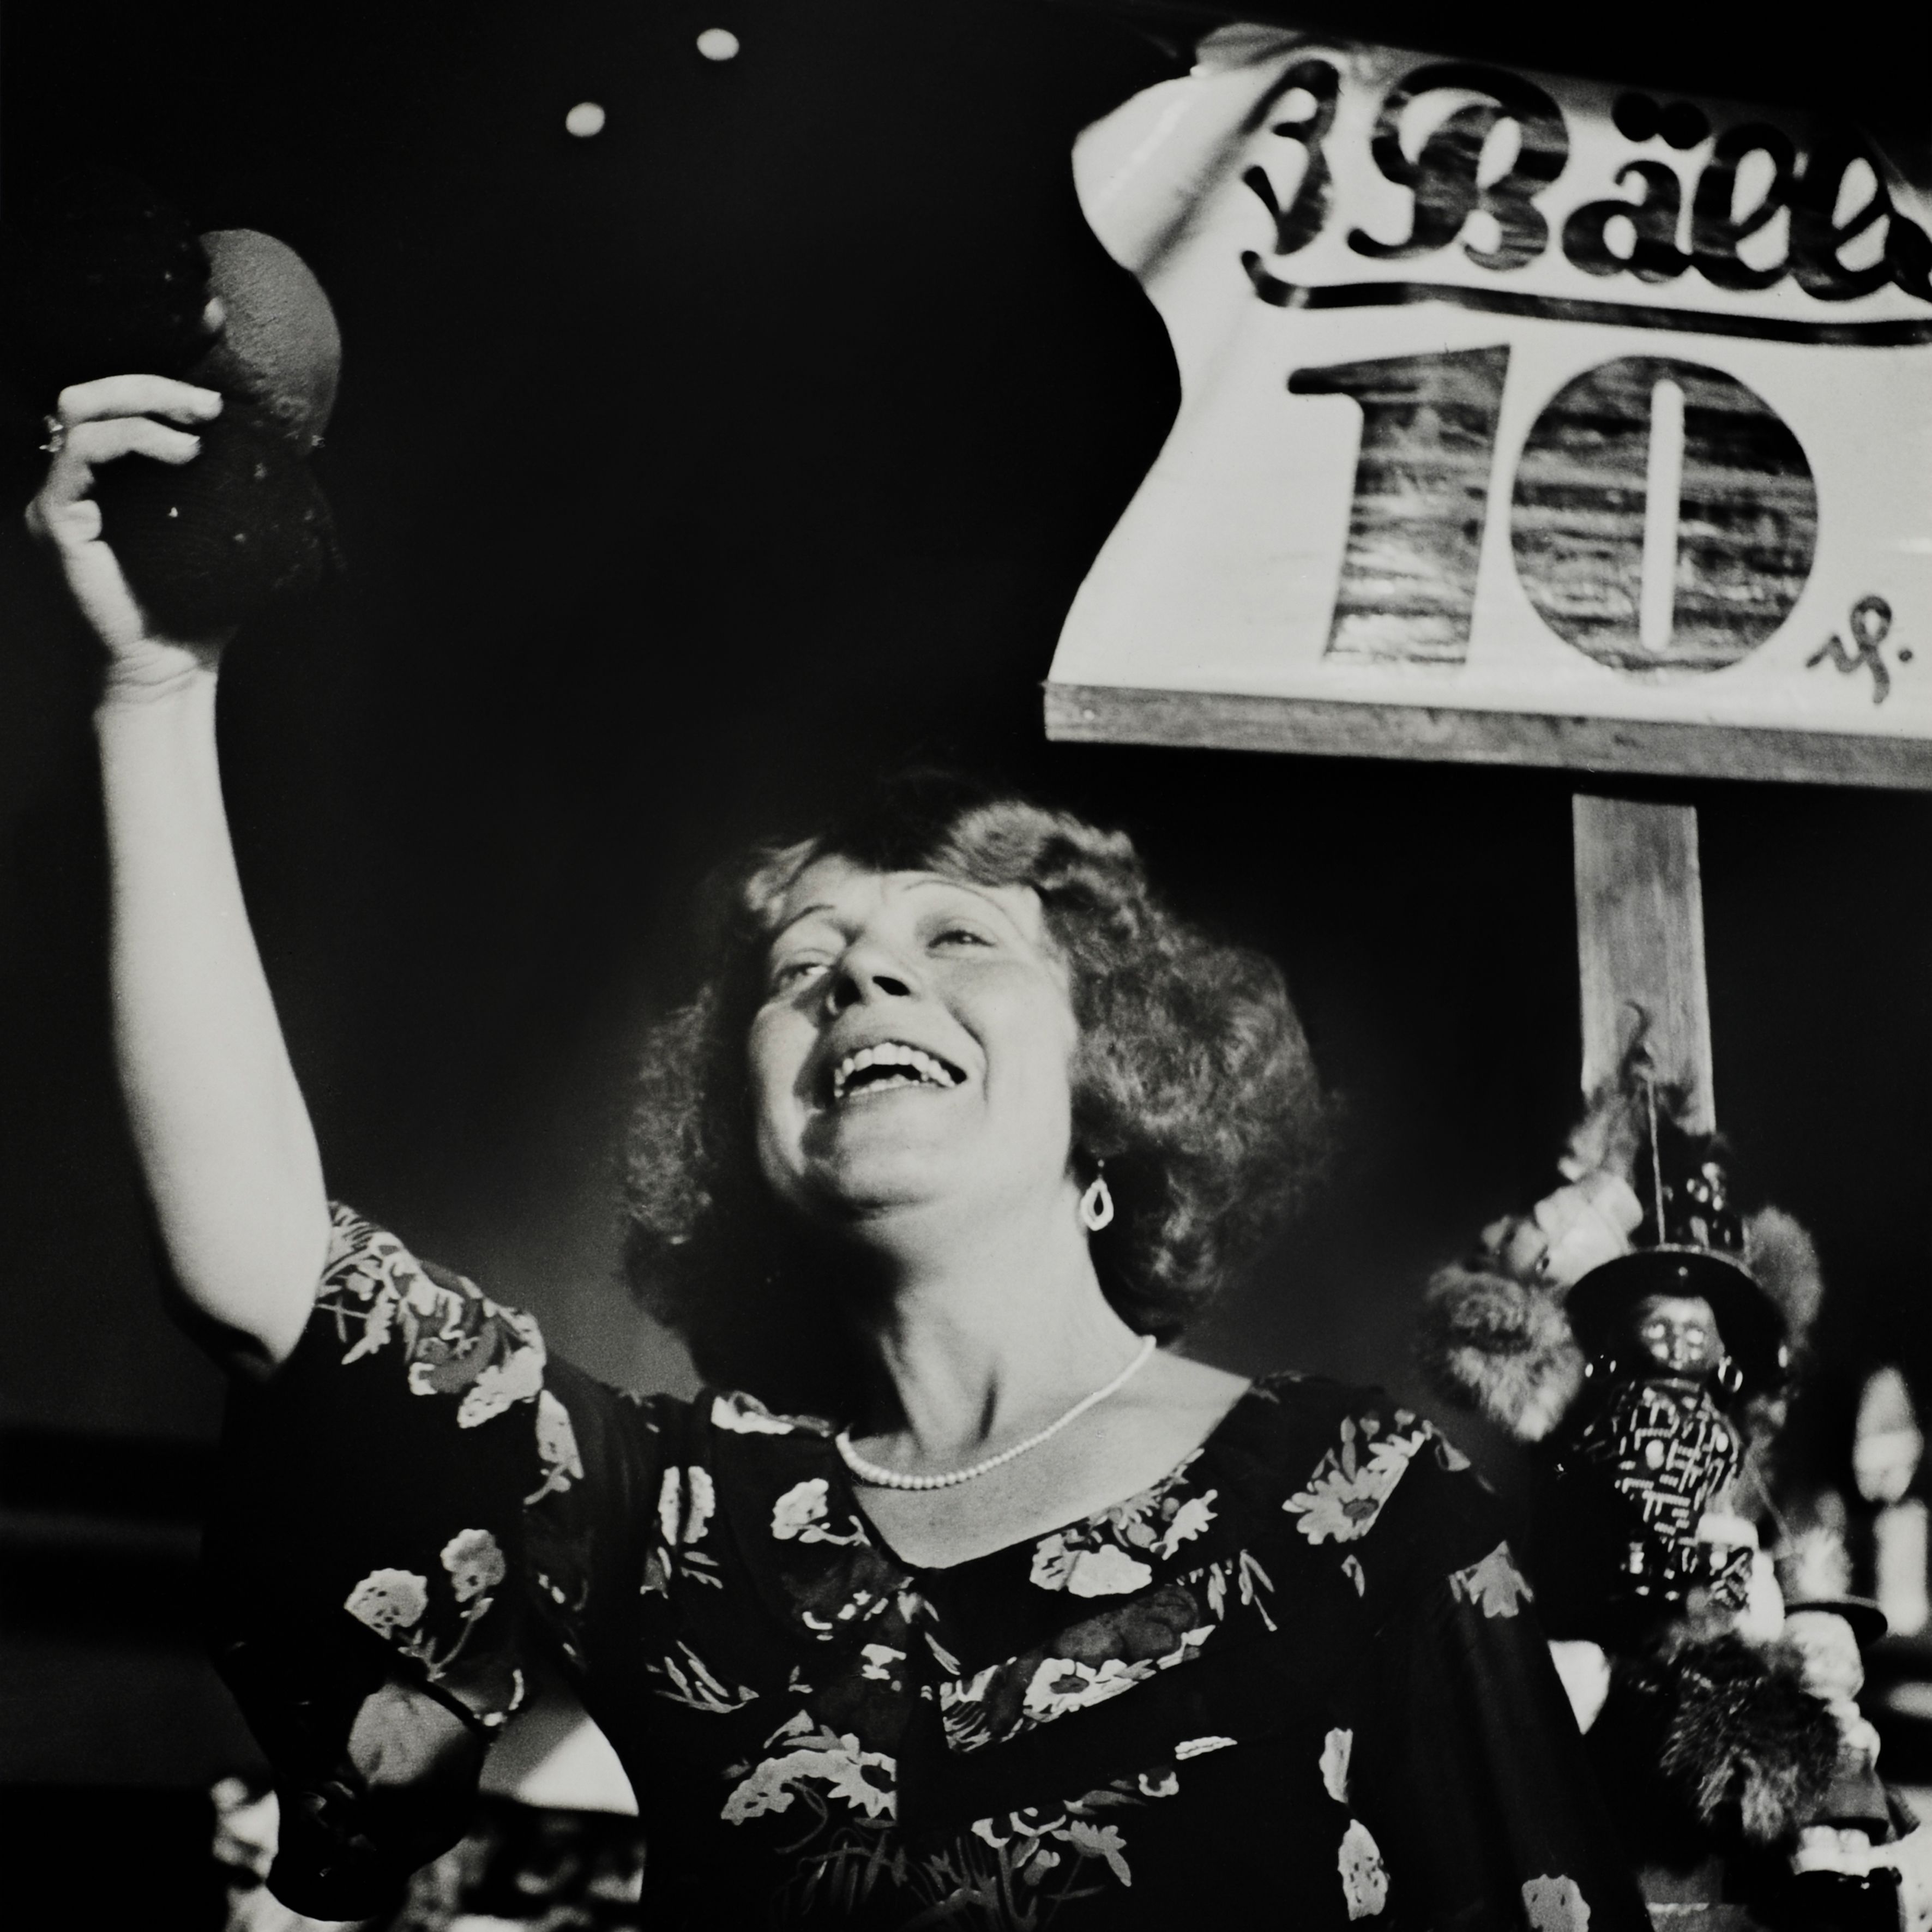 Woman photographed from below. On the top right a placard with "3 balls 10" written on it. Right hand is stretched up. 